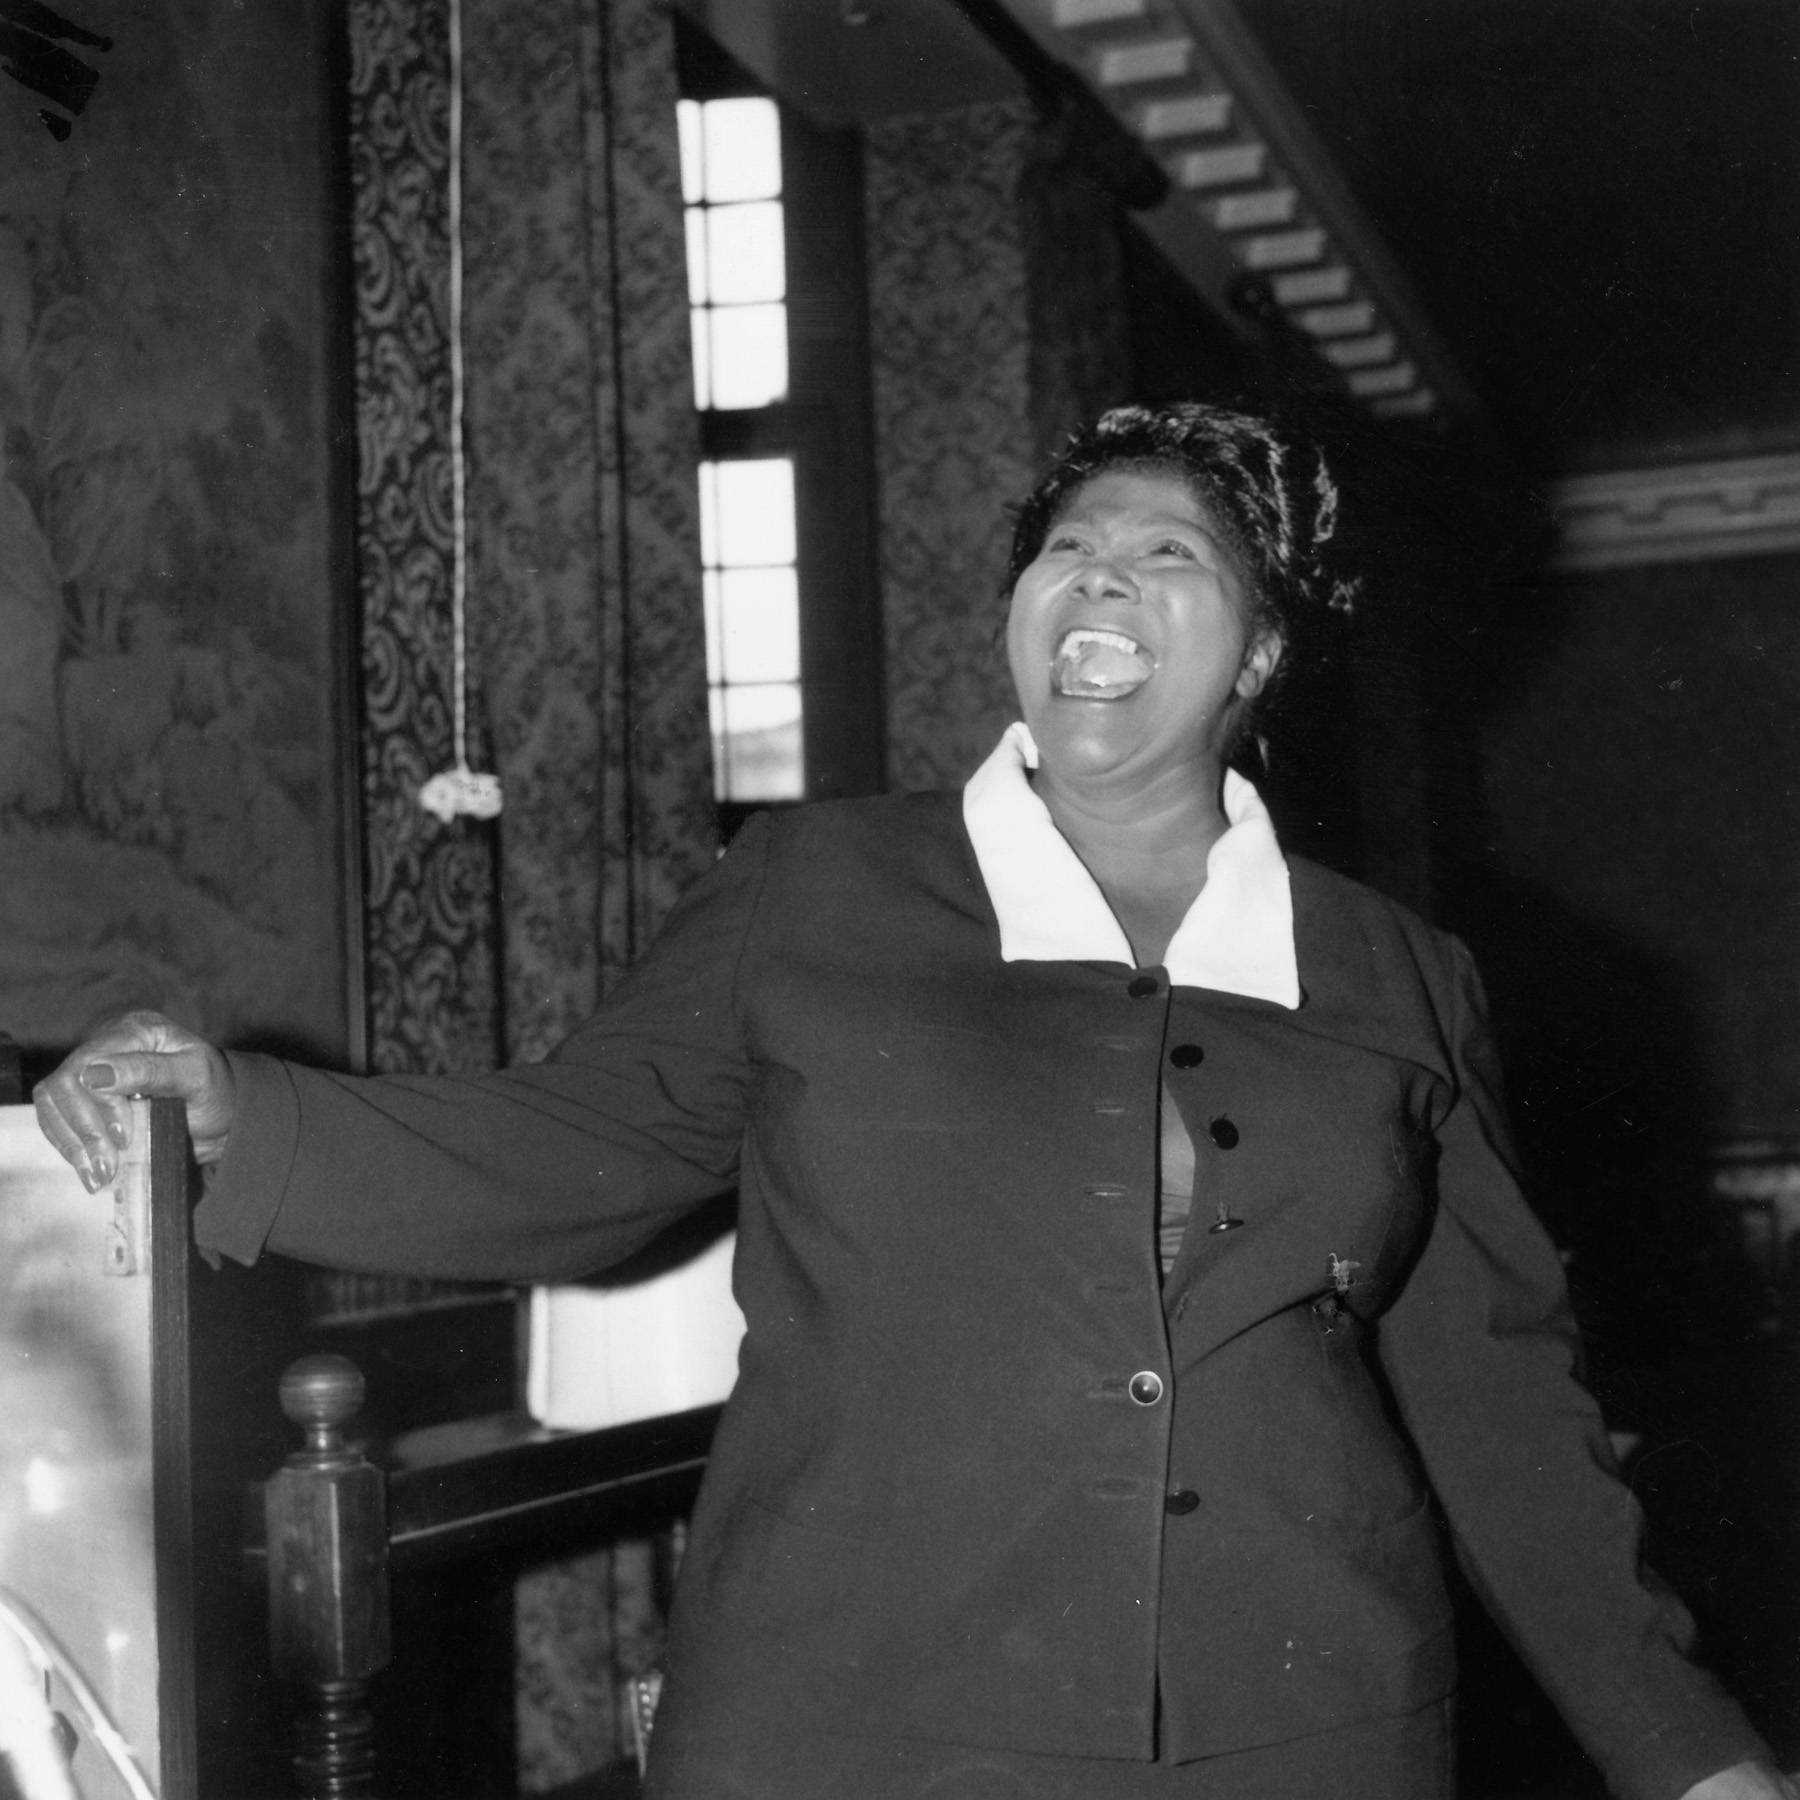 The Chicago Move and a Burgeoning Career - In 1927 at the age of 16, Mahalia Jackson moved to Chicago, Illinois. She worked as a domestic in homes in Chicago, but still satiated her passion for music by joining the Greater Salem Baptist Church Choir. Her powerful contralto voice was distinctive from early on, and found her work as a soloist in the city. She began touring with the Prince Johnson singers throughout the city.(Photo: Douglas Miller/Keystone/Getty Images)